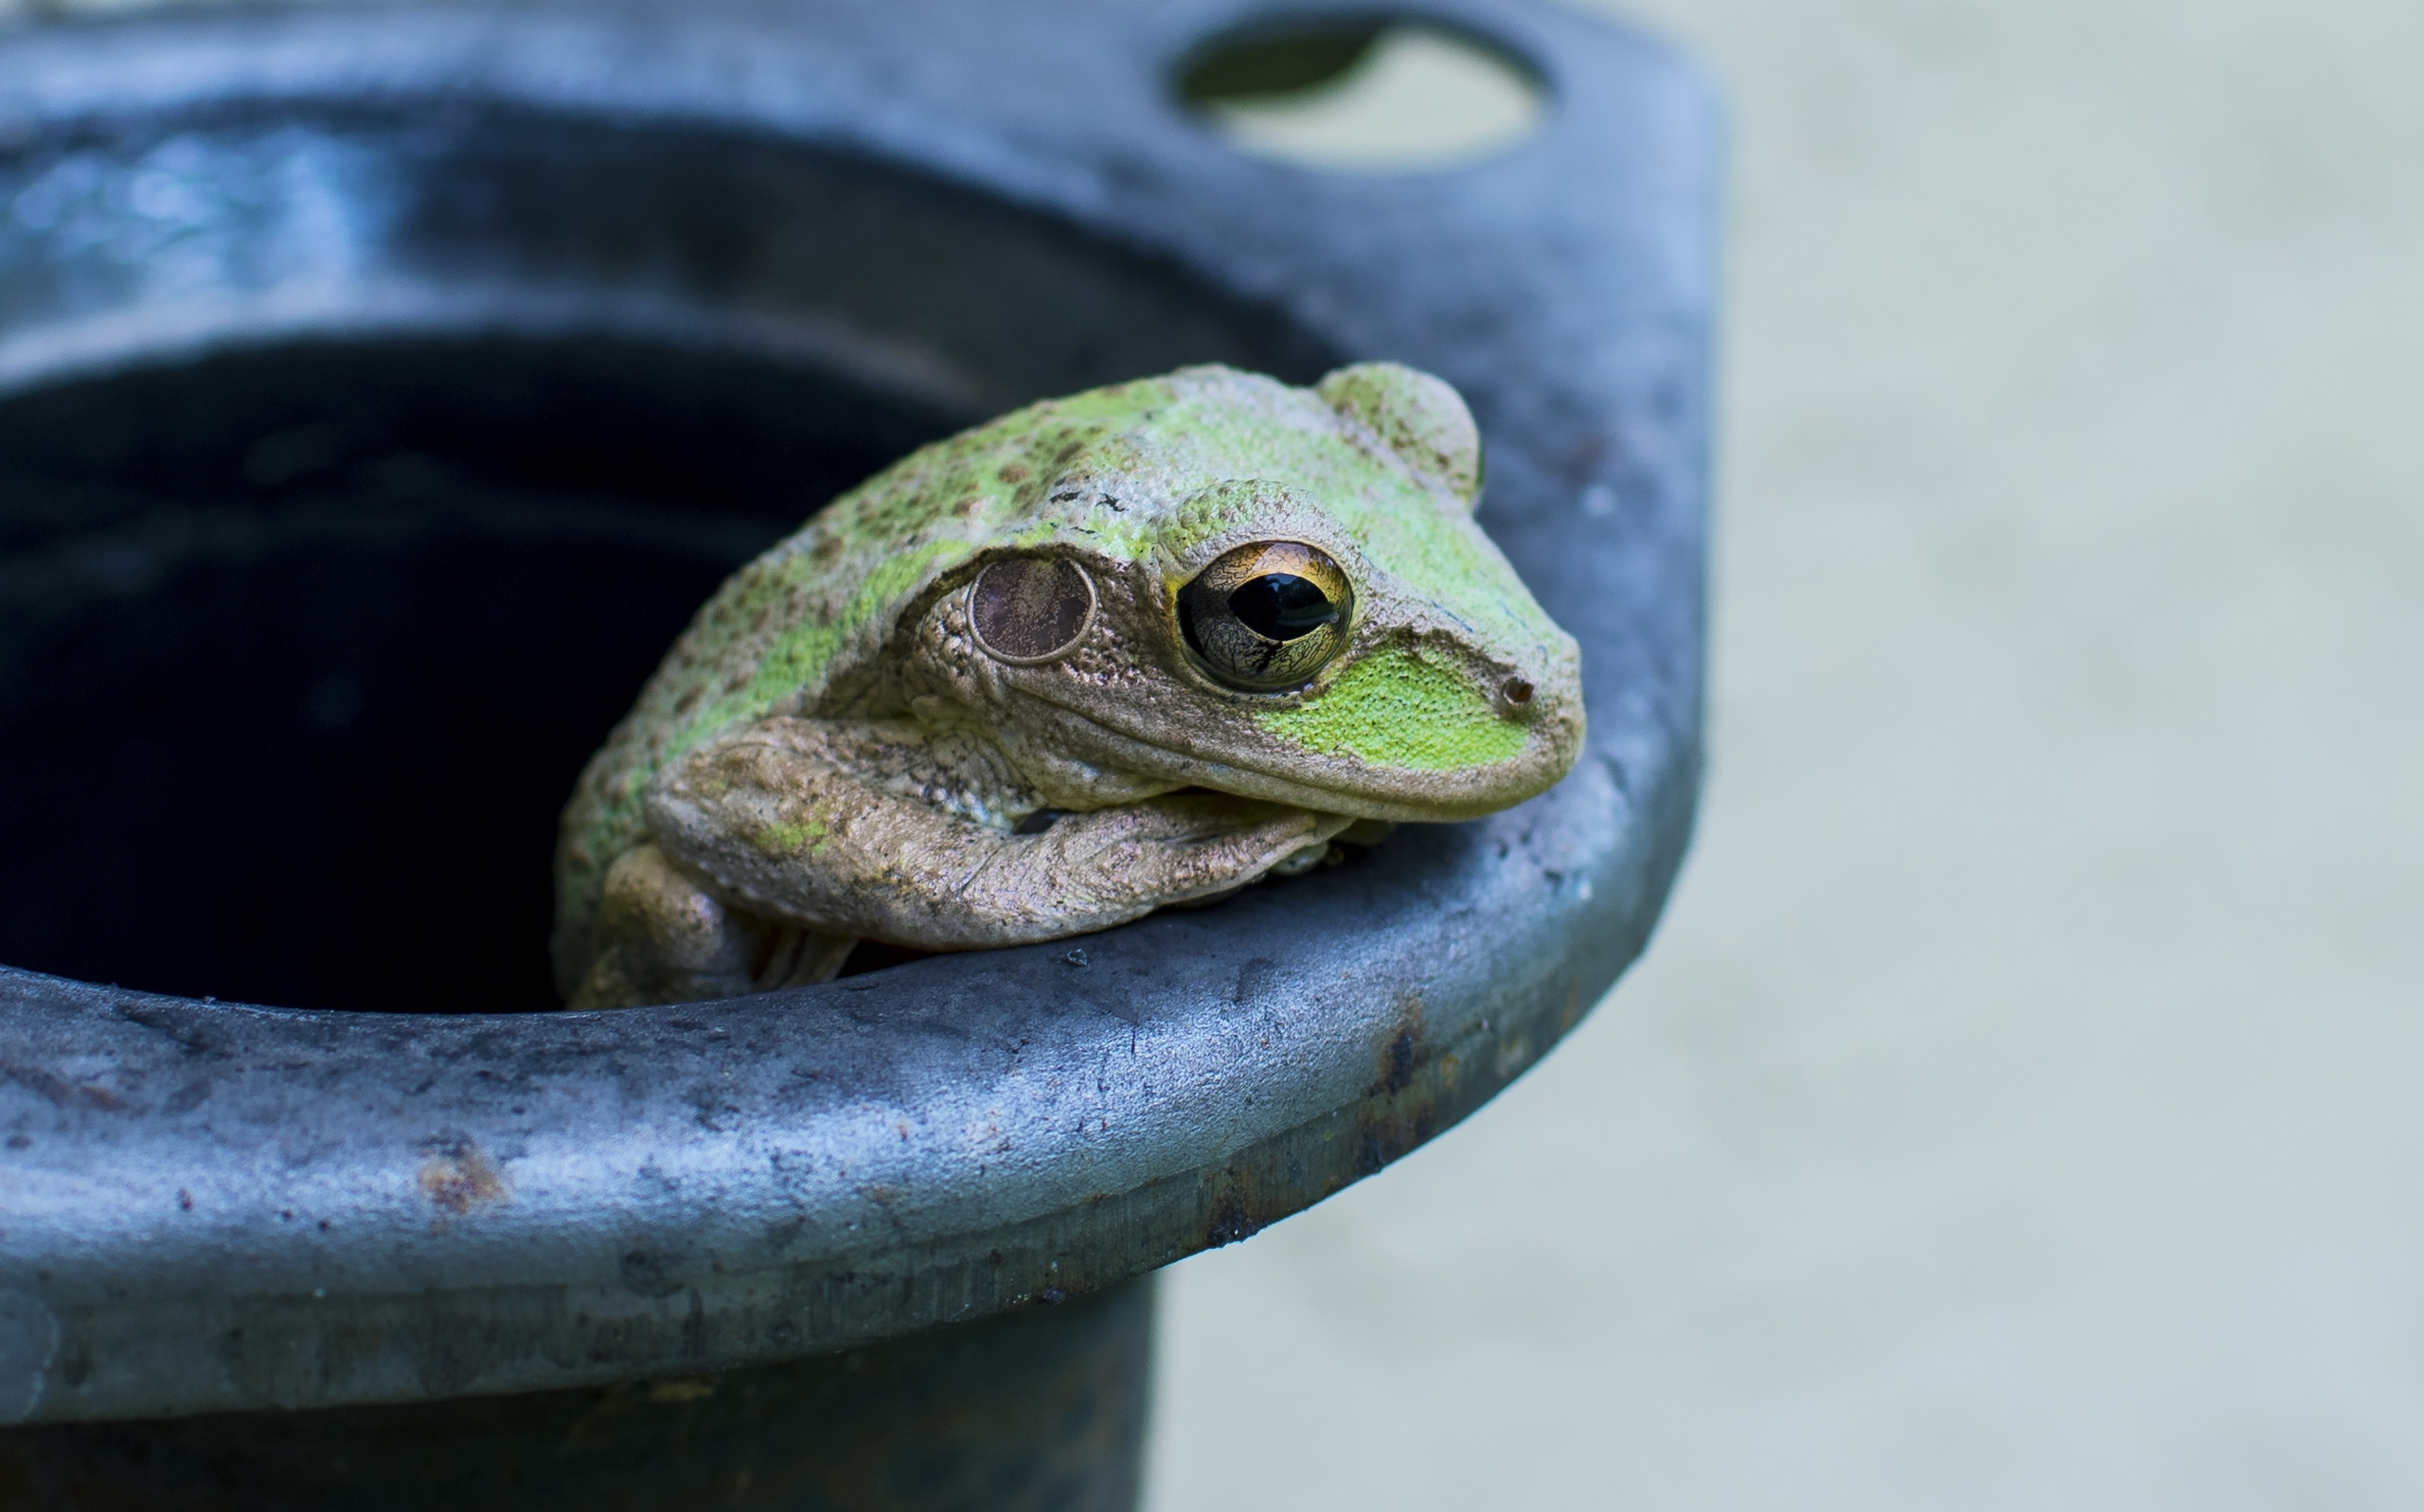 Are Frogs in Pots and Birds in Hands Recipes for Dissatisfaction?